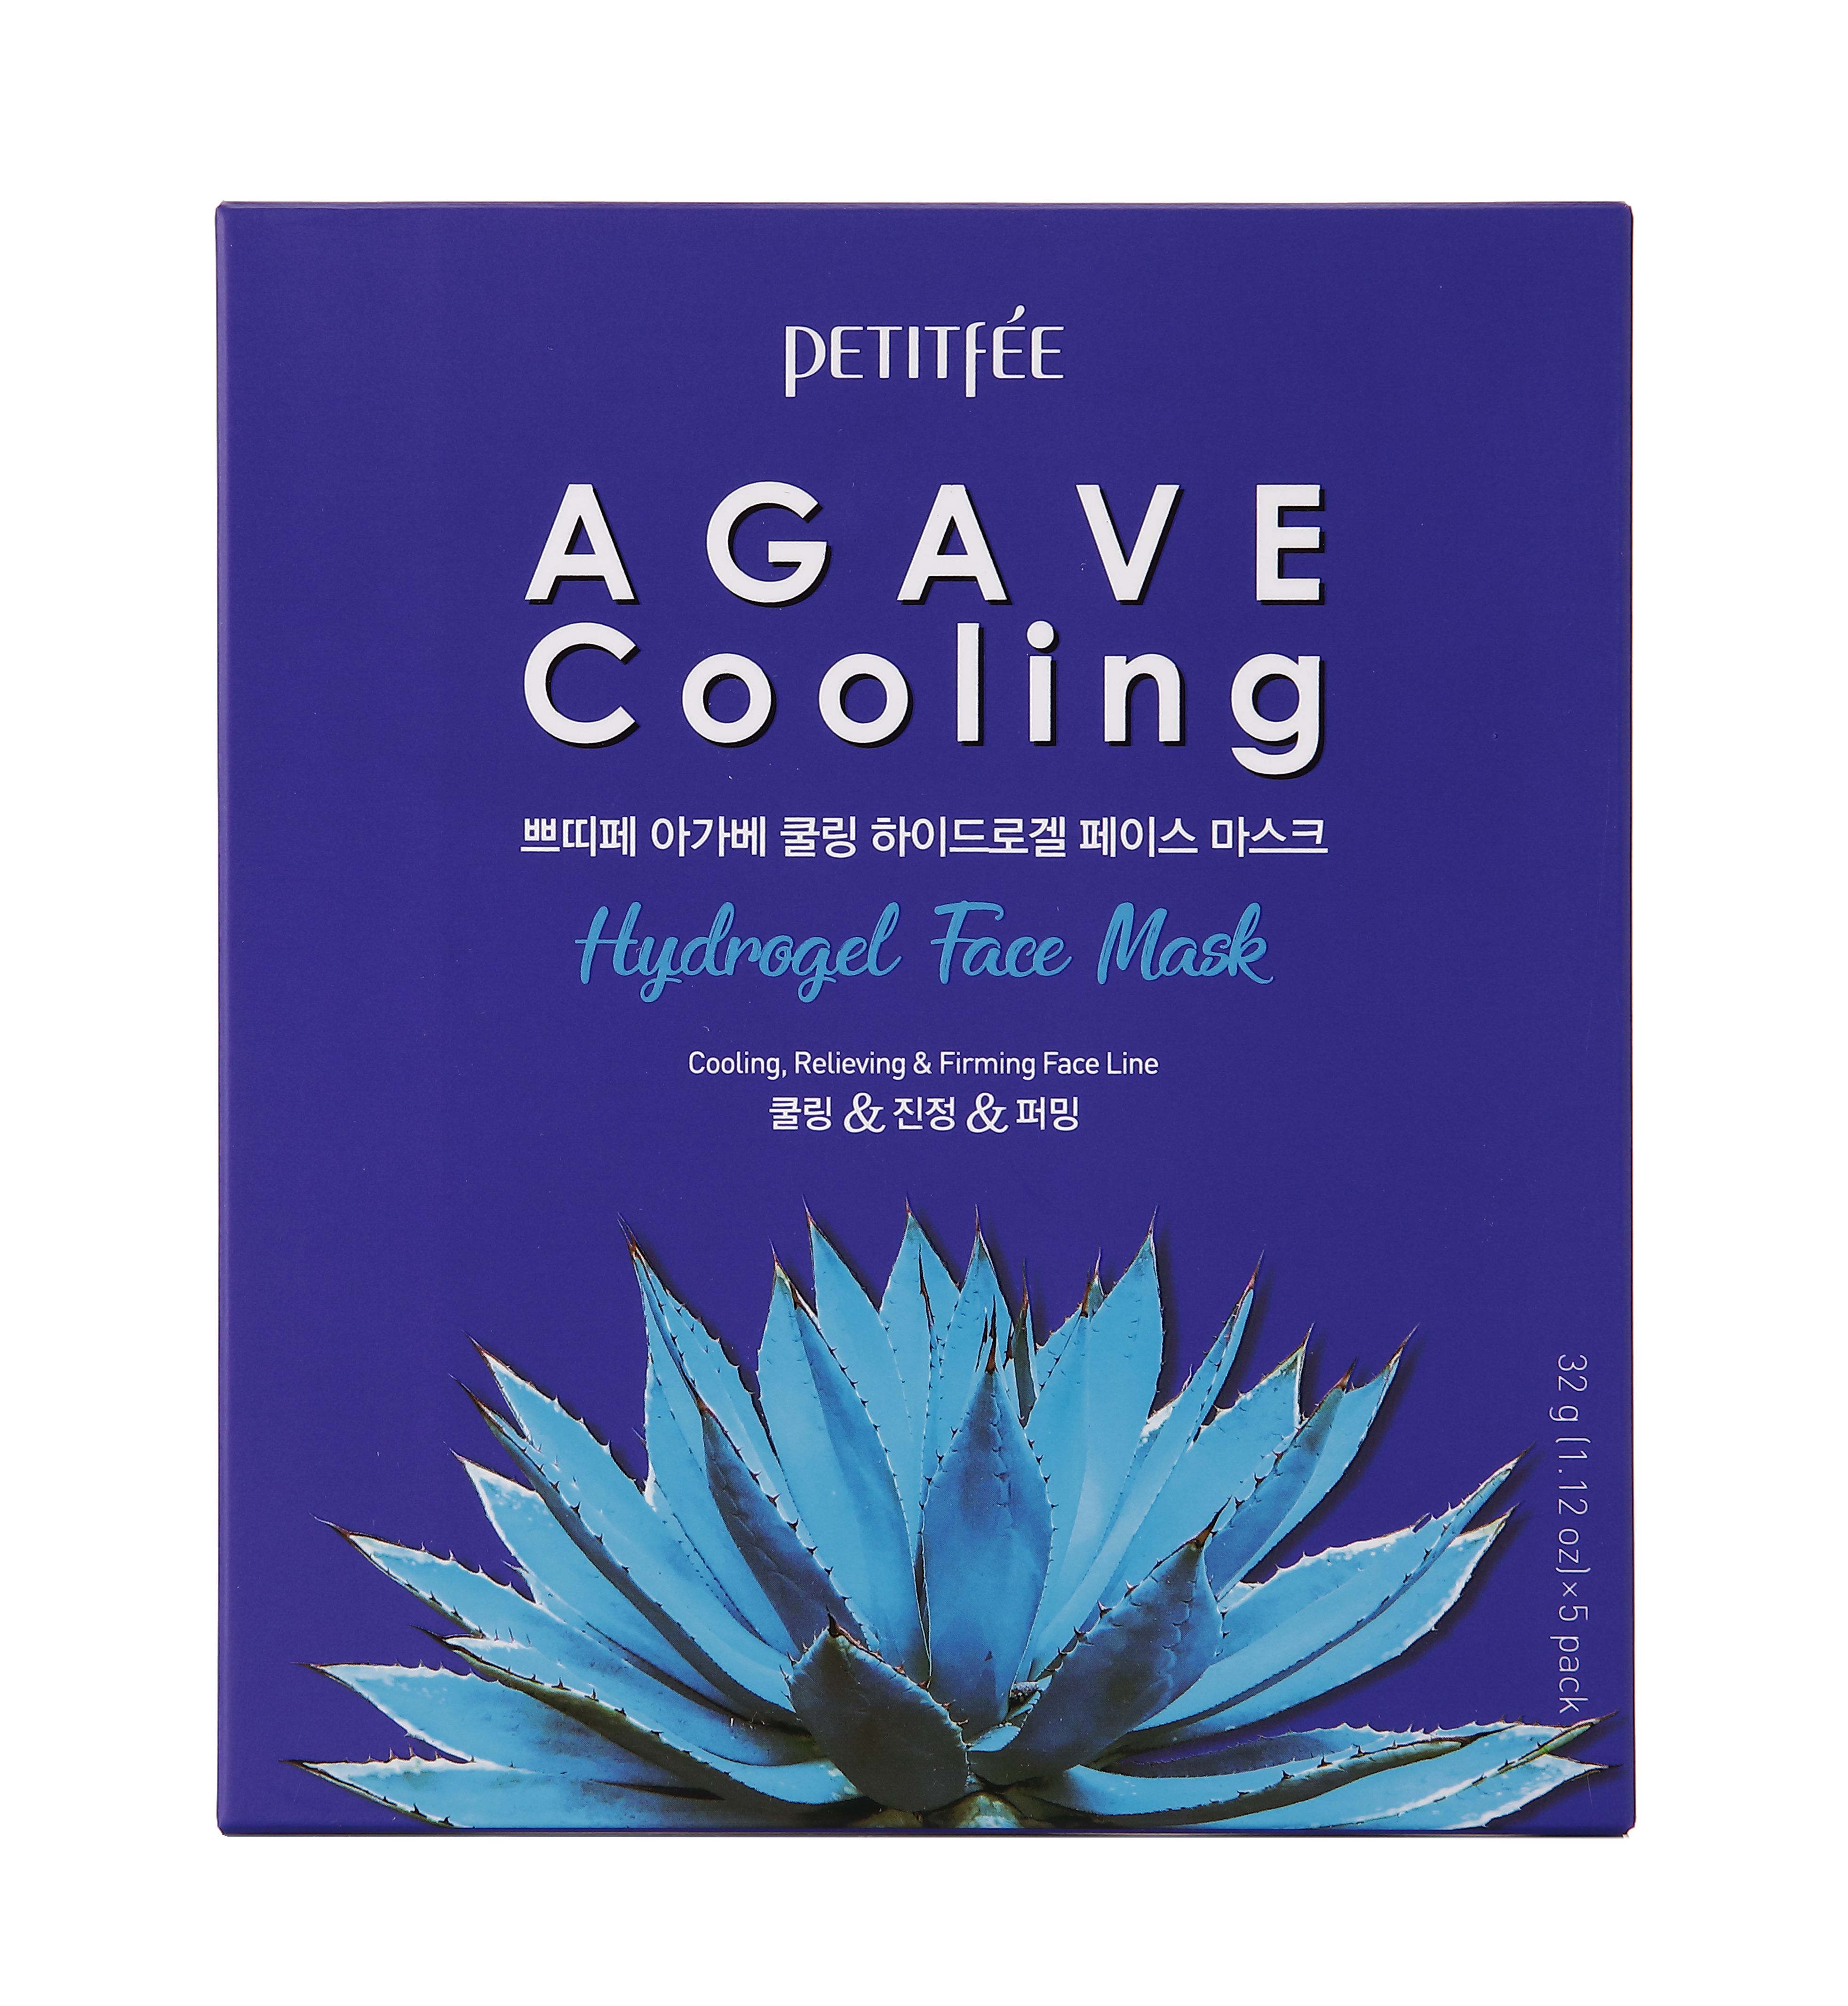 Petitfee  Koelf Agave Cooling Hydrogel Face Mask 32 g * 5 sheets